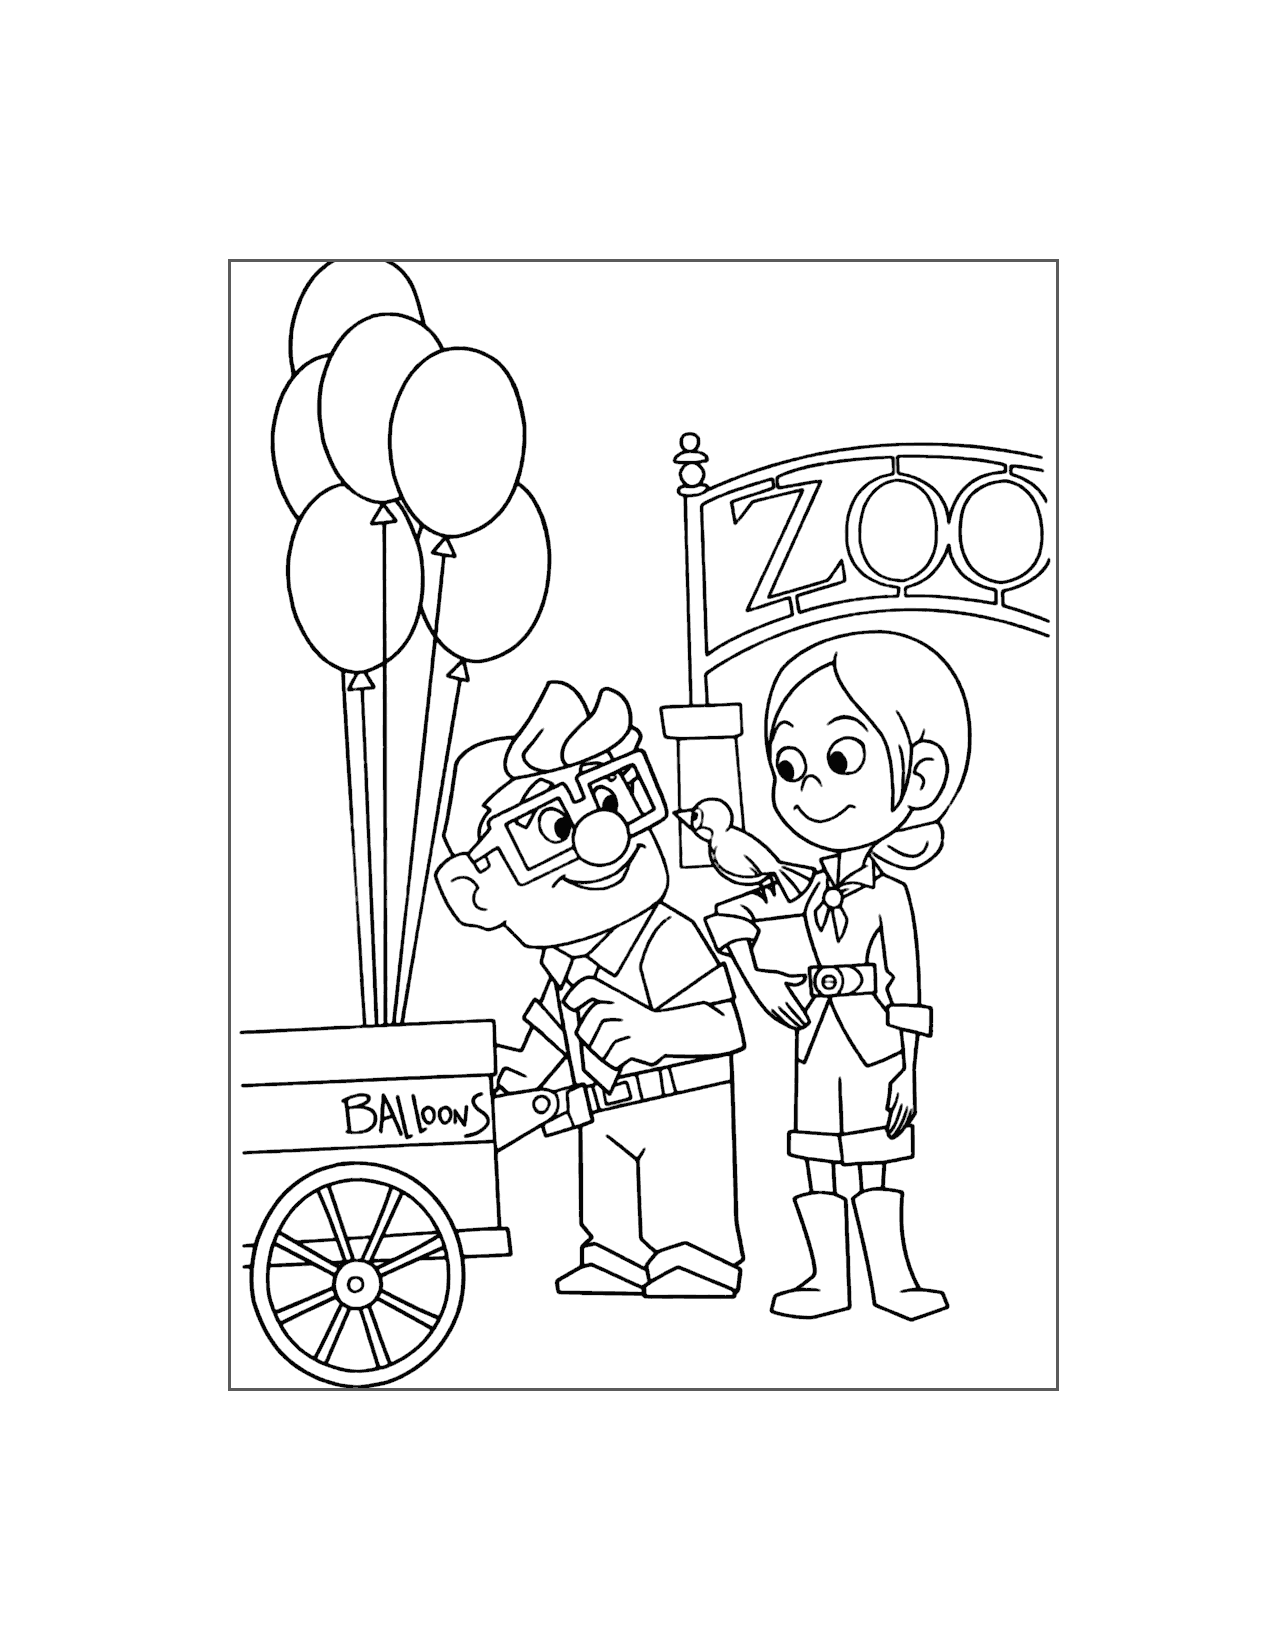 Young Carl And Ellie At The Zoo Up Coloring Page